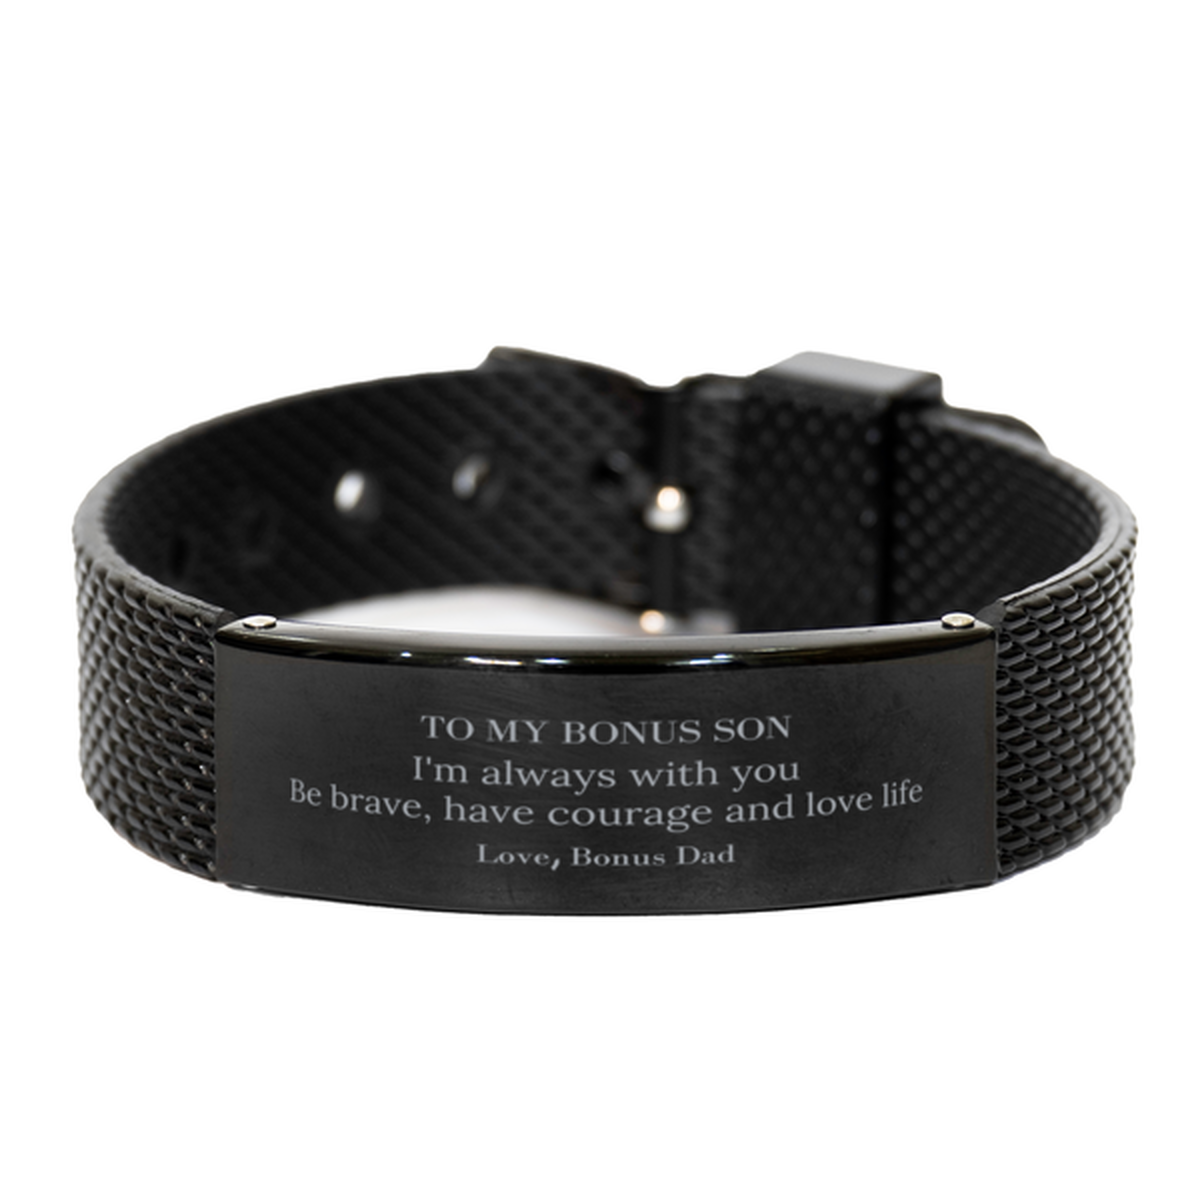 To My Bonus Son Gifts from Bonus Dad, Unique Black Shark Mesh Bracelet Inspirational Christmas Birthday Graduation Gifts for Bonus Son I'm always with you. Be brave, have courage and love life. Love, Bonus Dad